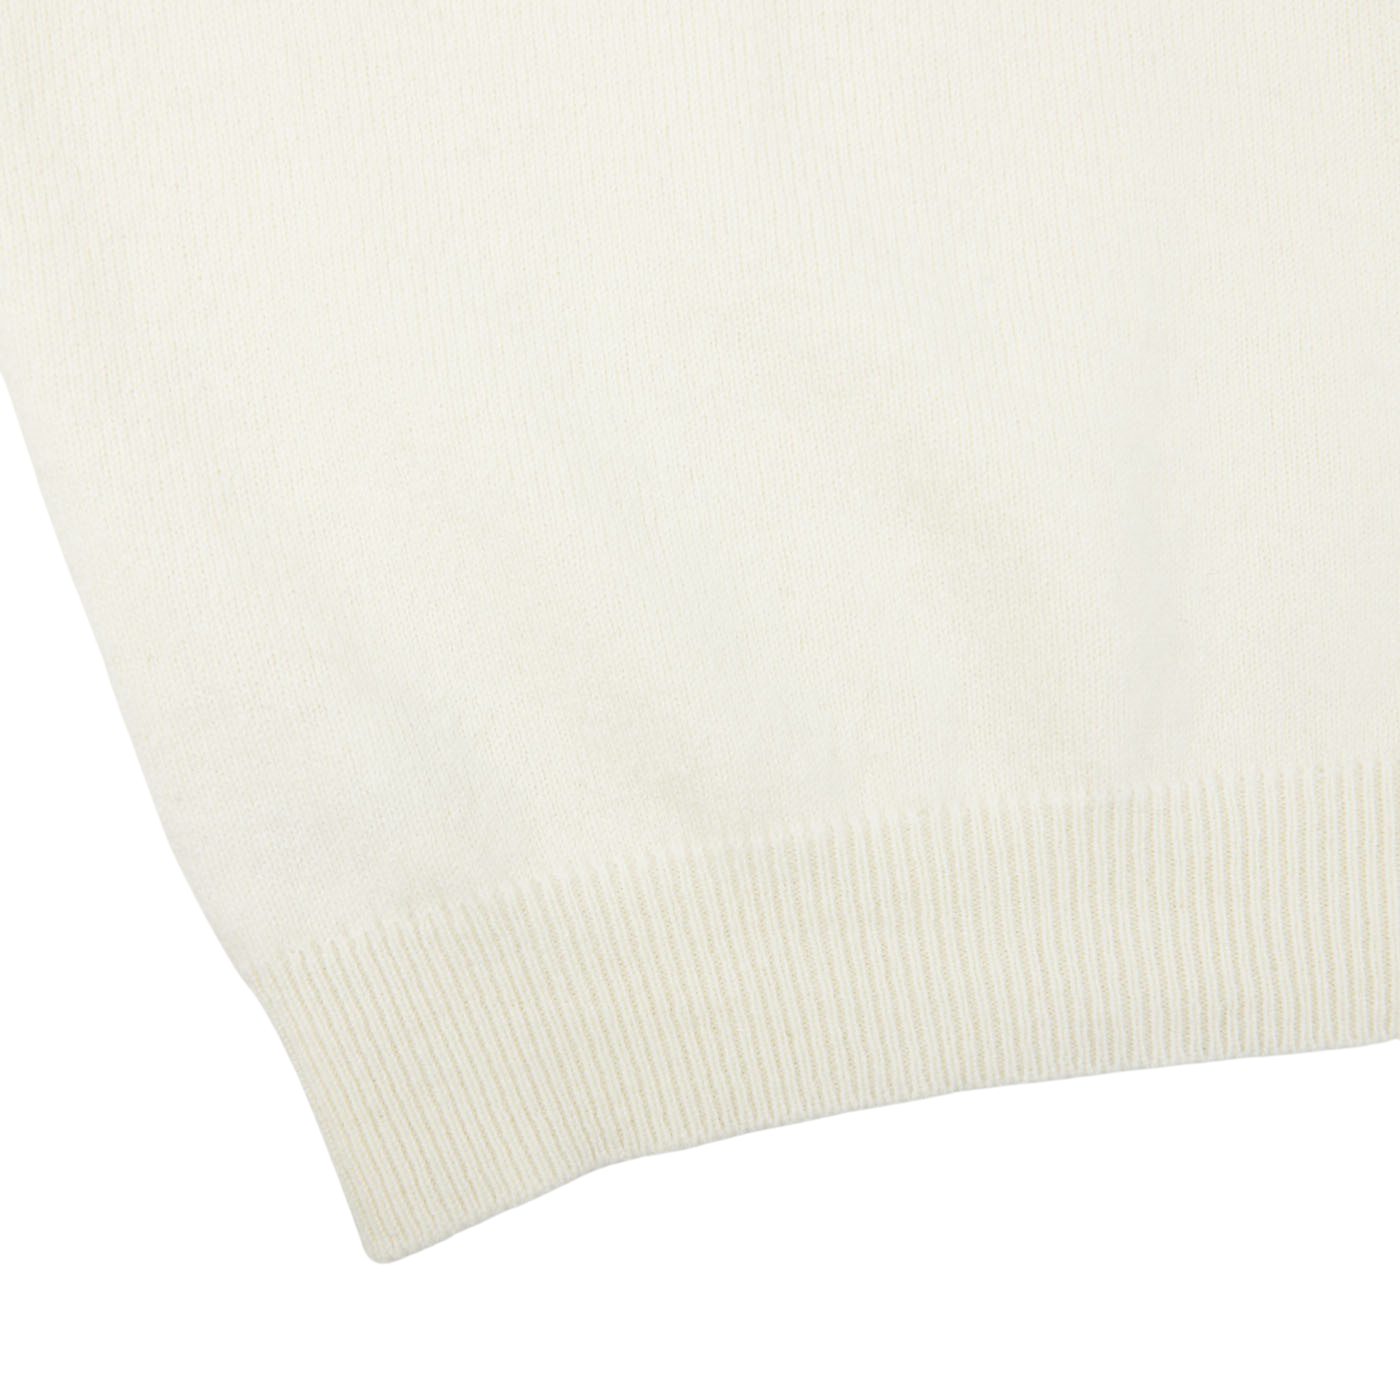 A close up of a William Lockie Ecru White Lambswool V-Neck Sweater on a white surface.